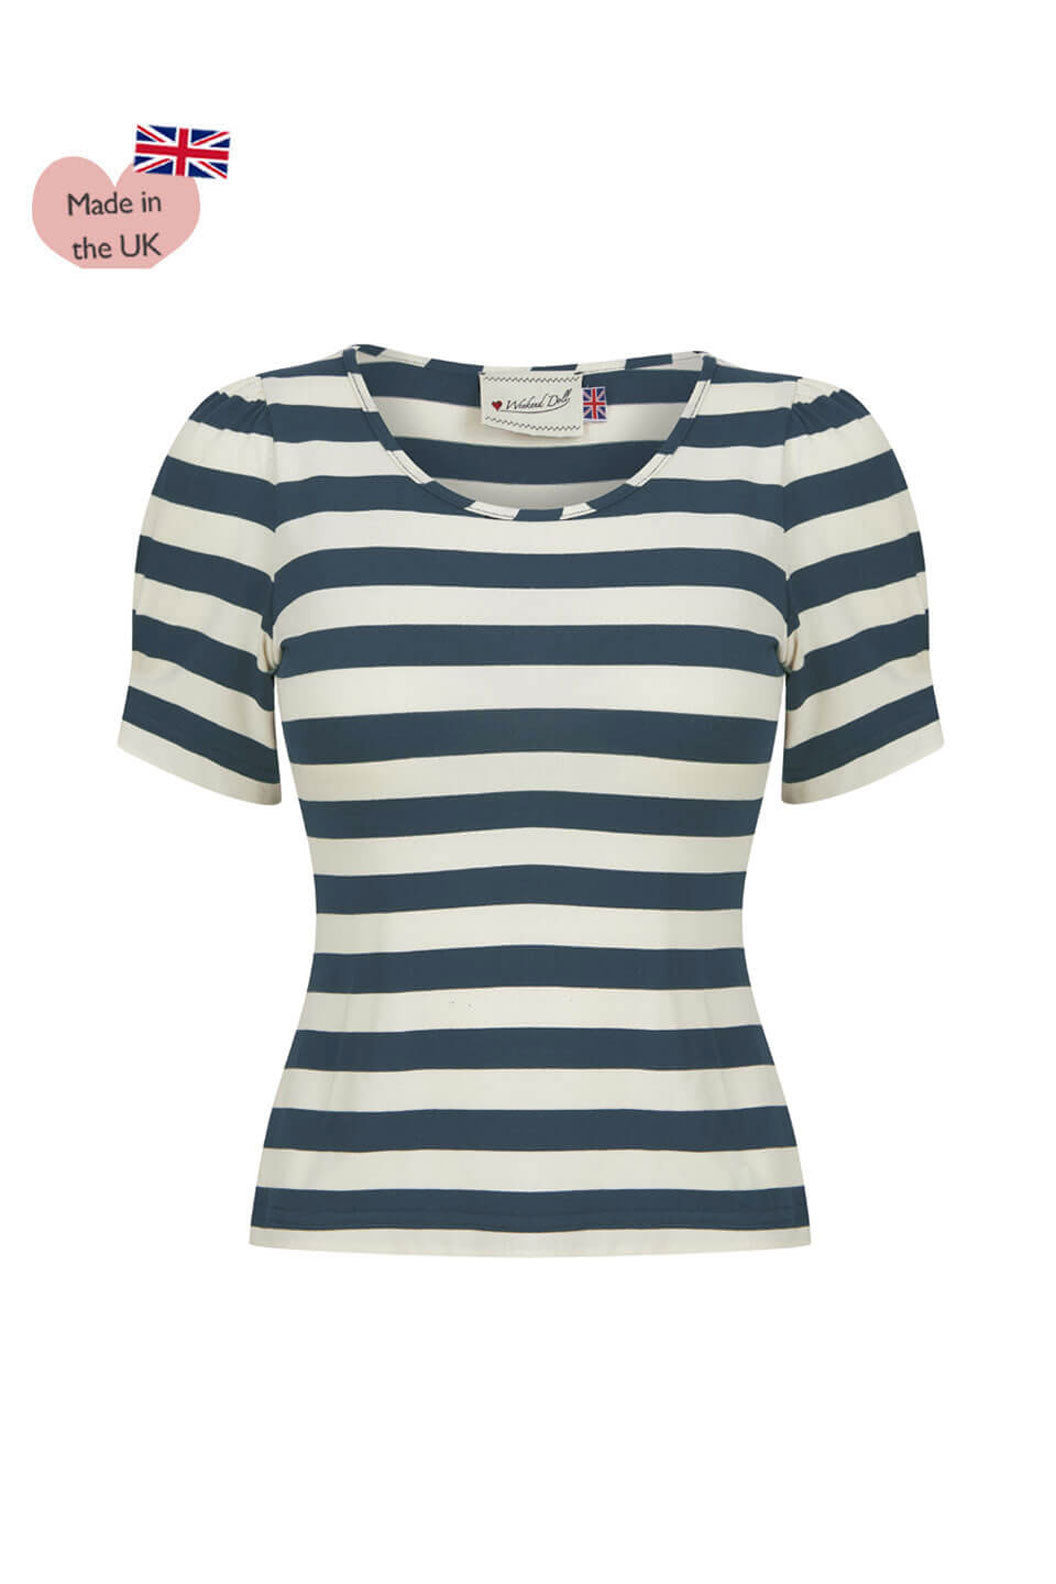 Retro Scoop Neck Petrol Blue and Eco Striped Jersey Top  | Retro Pin Up Style | Weekend Doll 